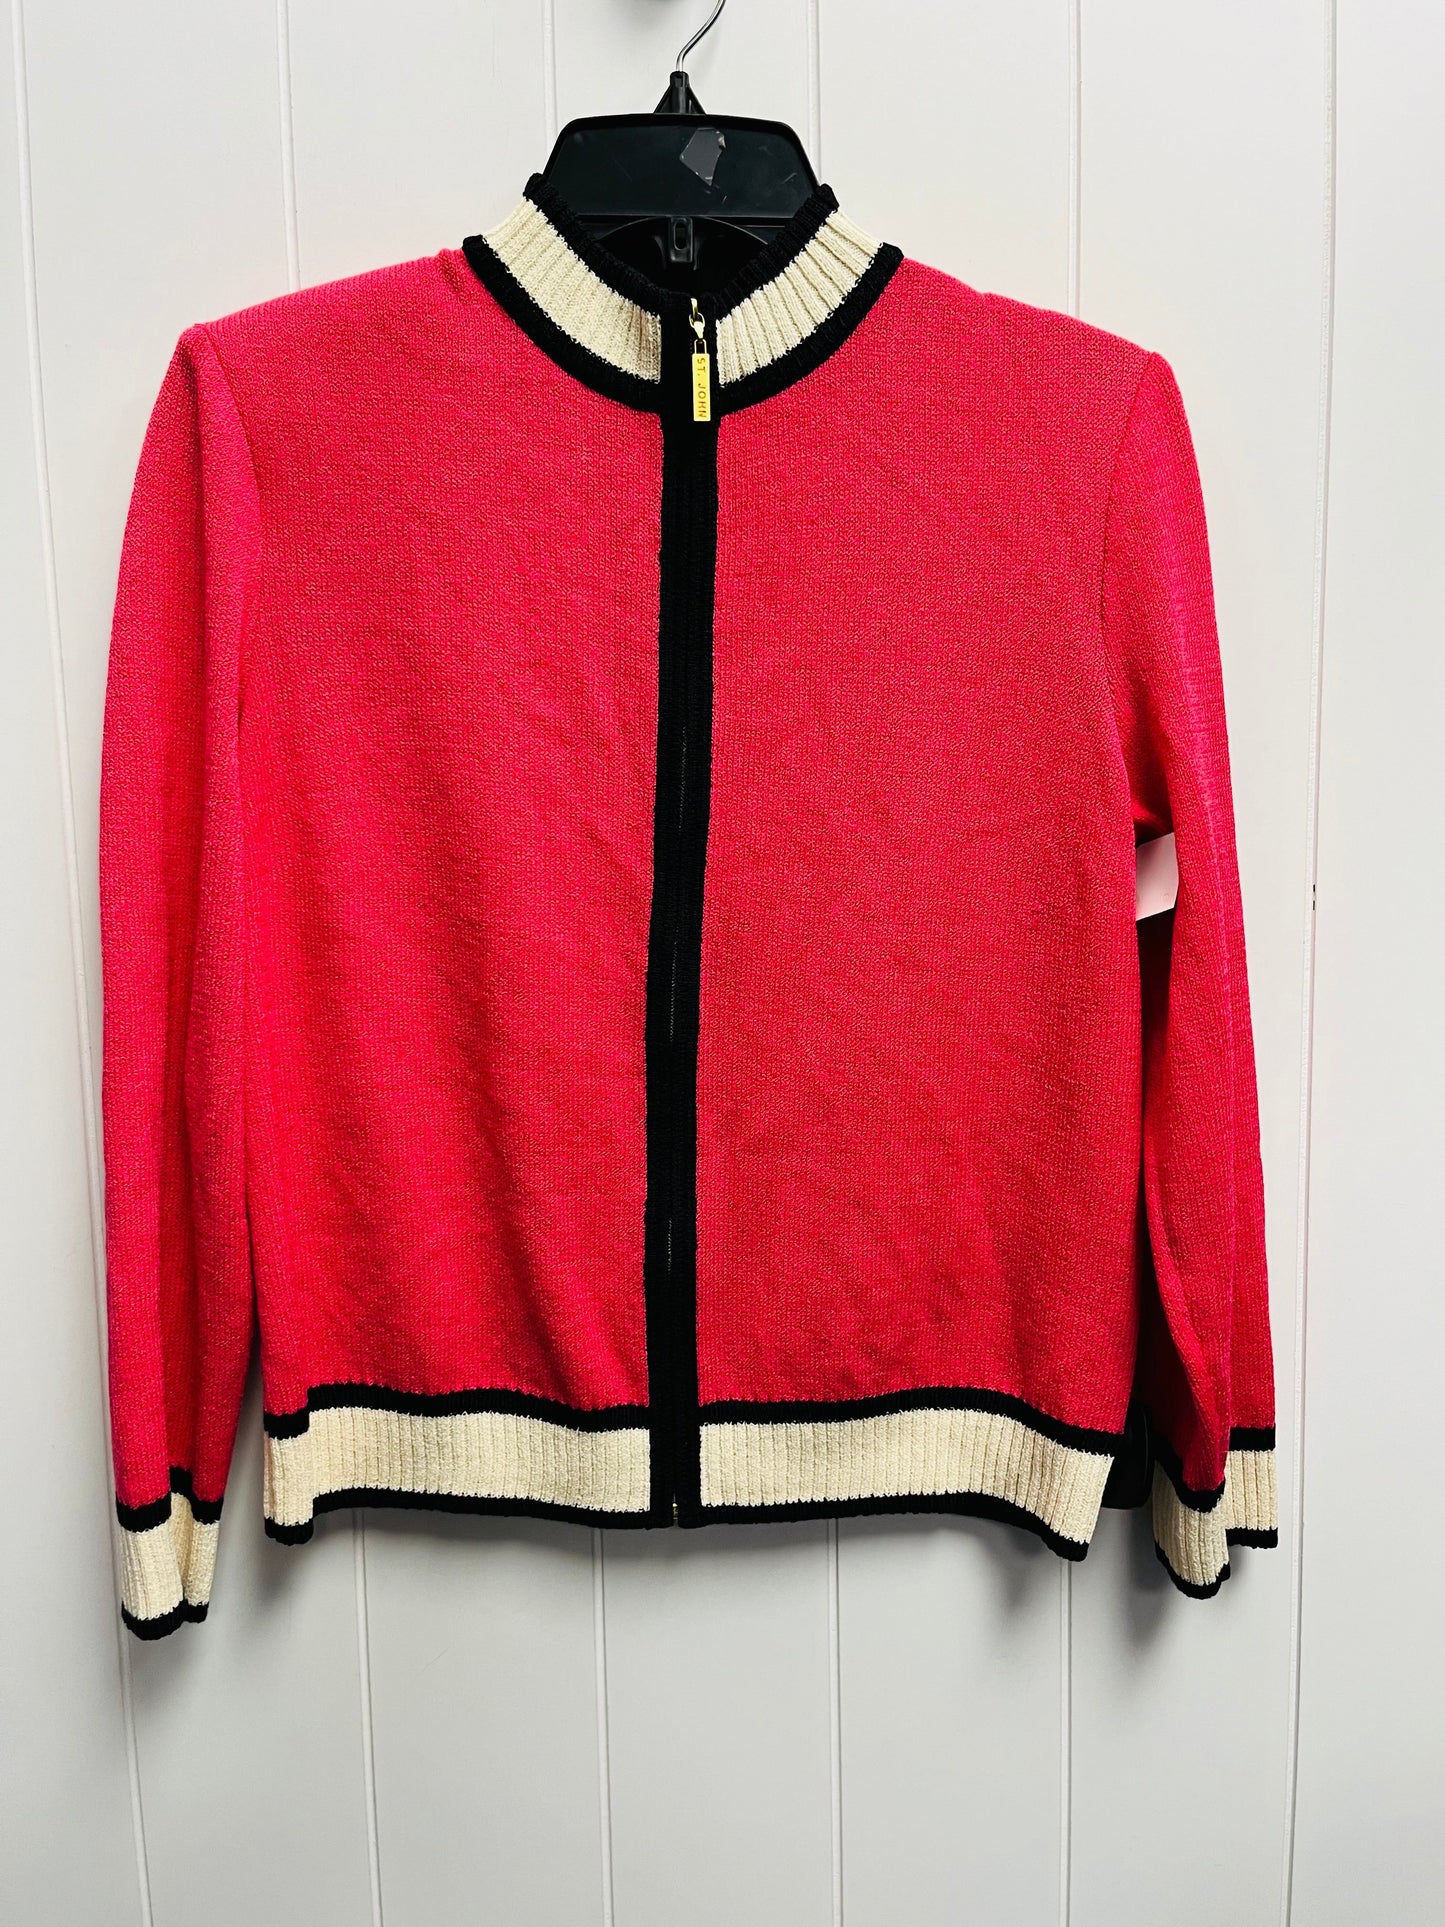 Pink Jacket Other St John Collection, Size Petite